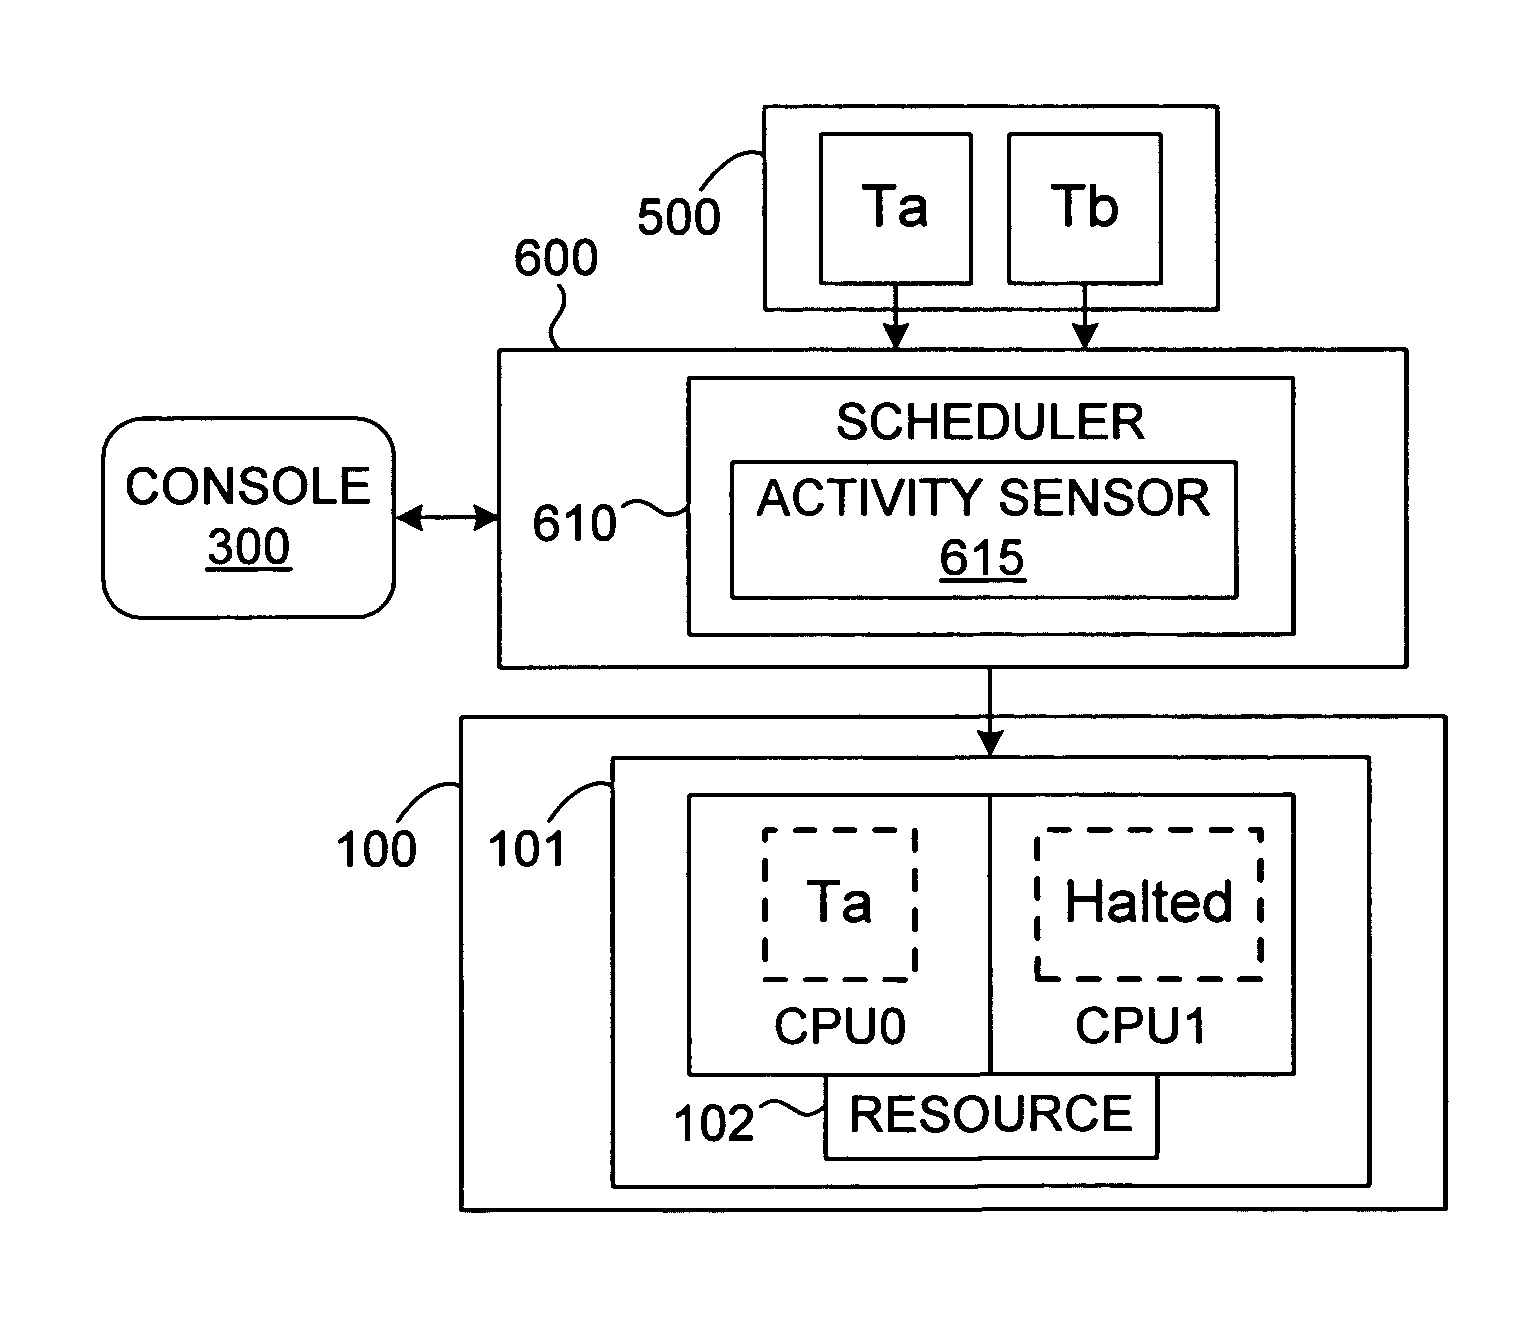 Mechanism for scheduling execution of threads for fair resource allocation in a multi-threaded and/or multi-core processing system